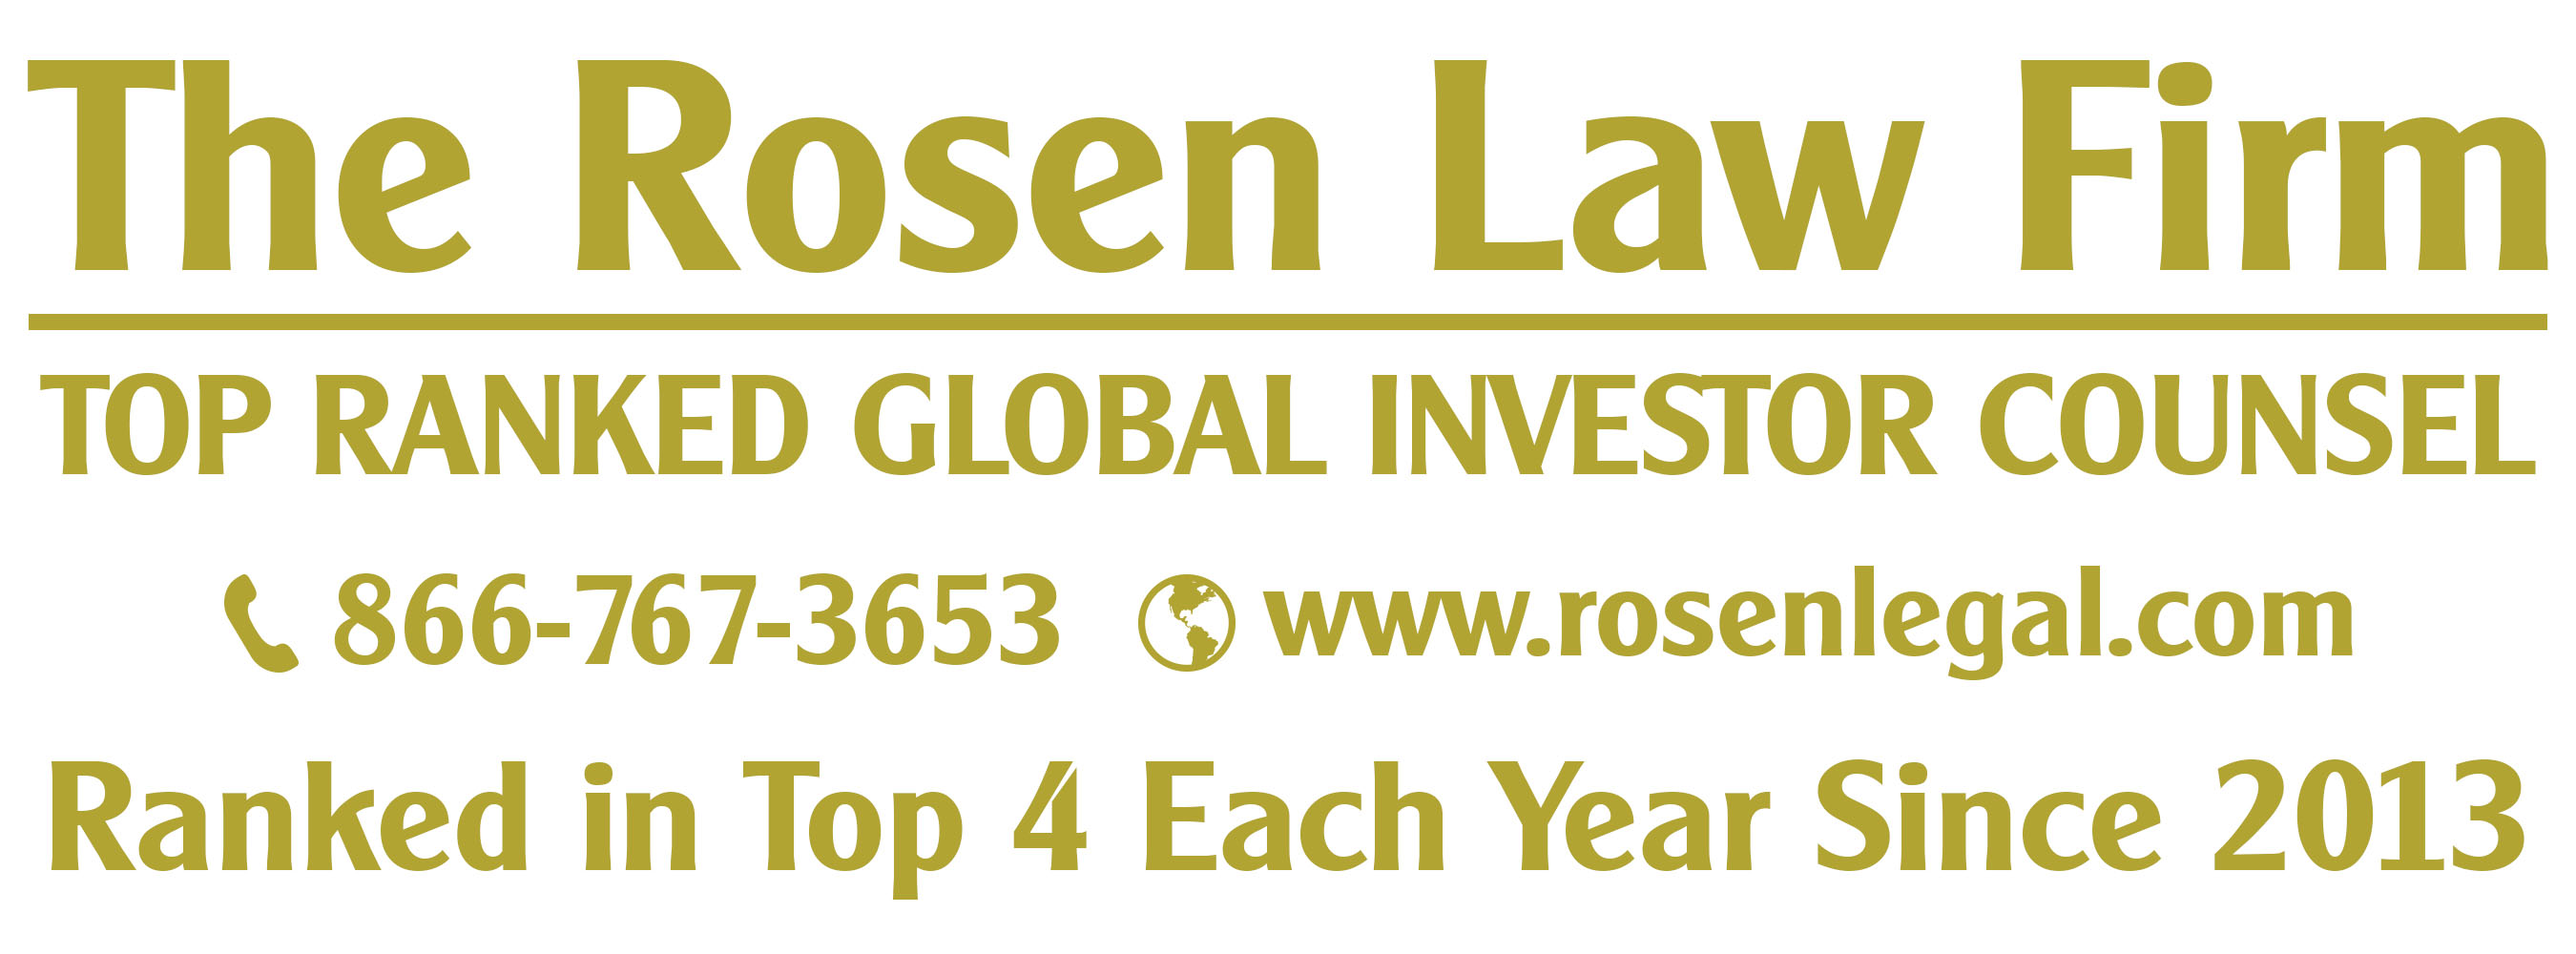 Rosen Law Firm PA, Monday, March 27, 2023, Press release picture